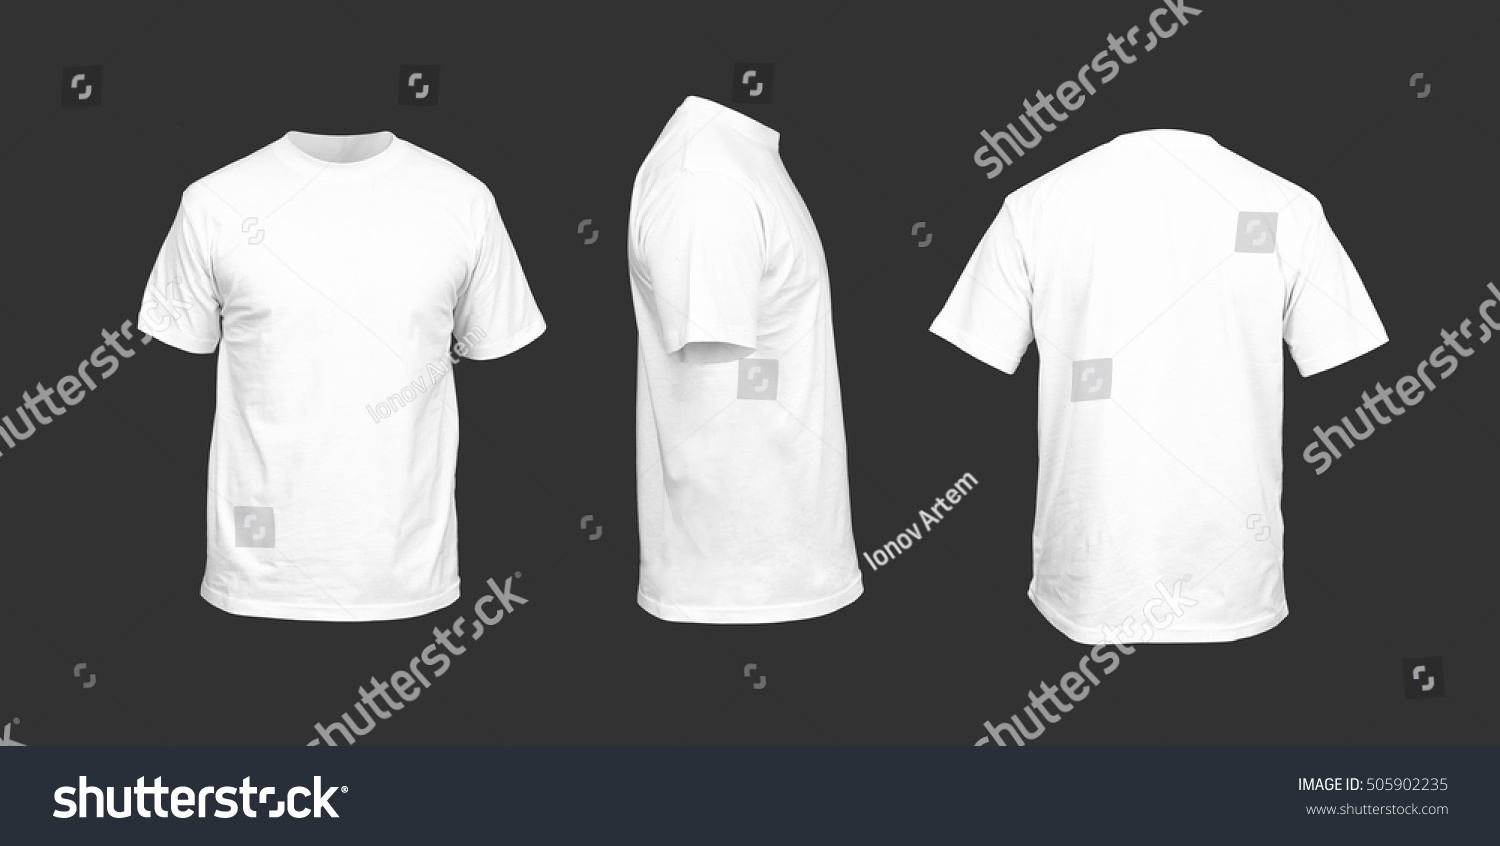 Men's t-shirt of white color against a dark background #505902235